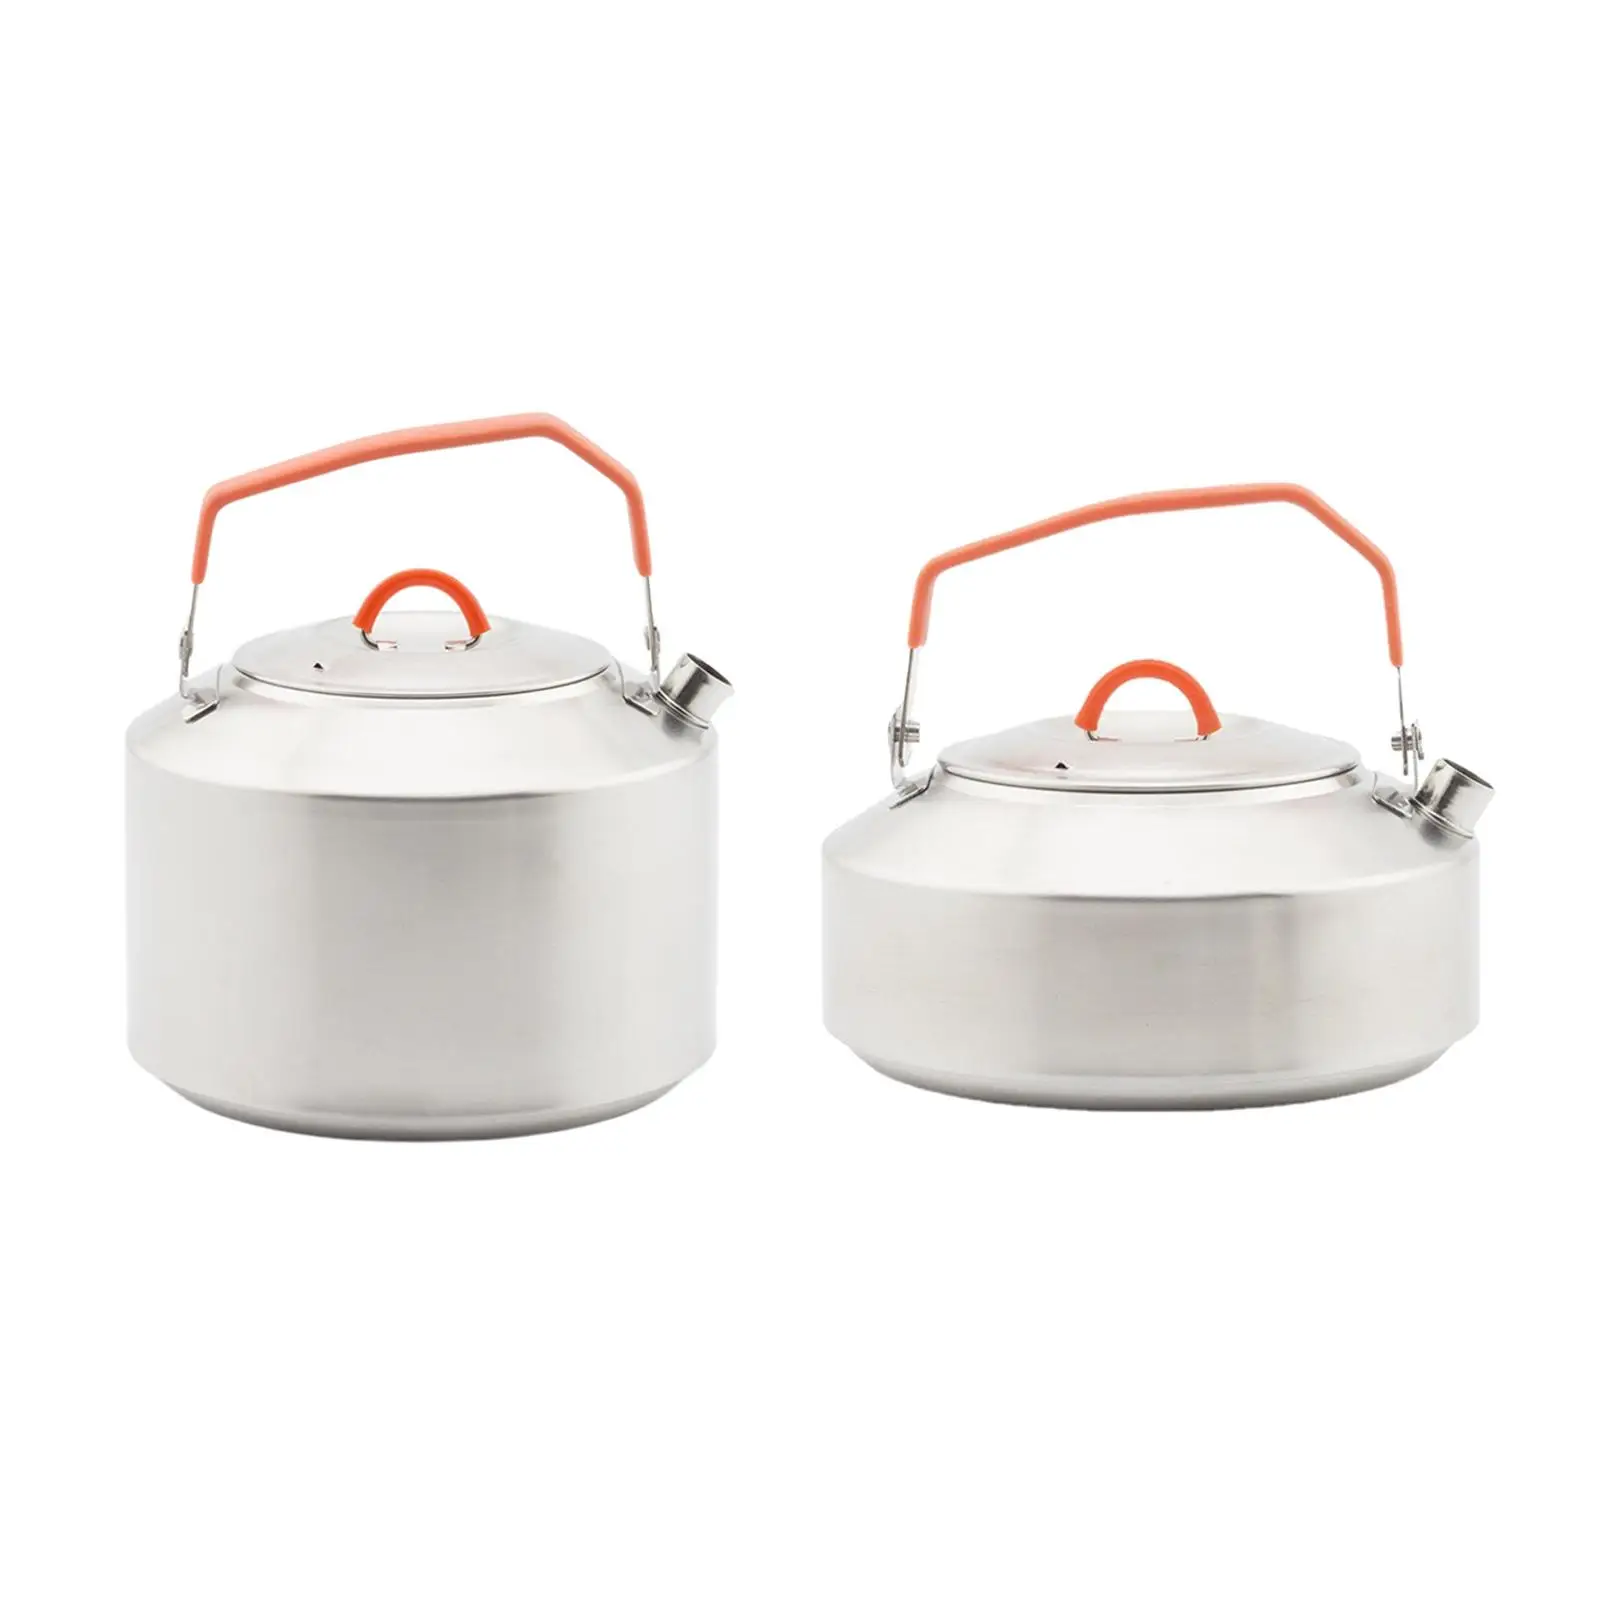 Lightweight Camping Kettle Campfire Kettle Water Kettle for Outdoor Camping